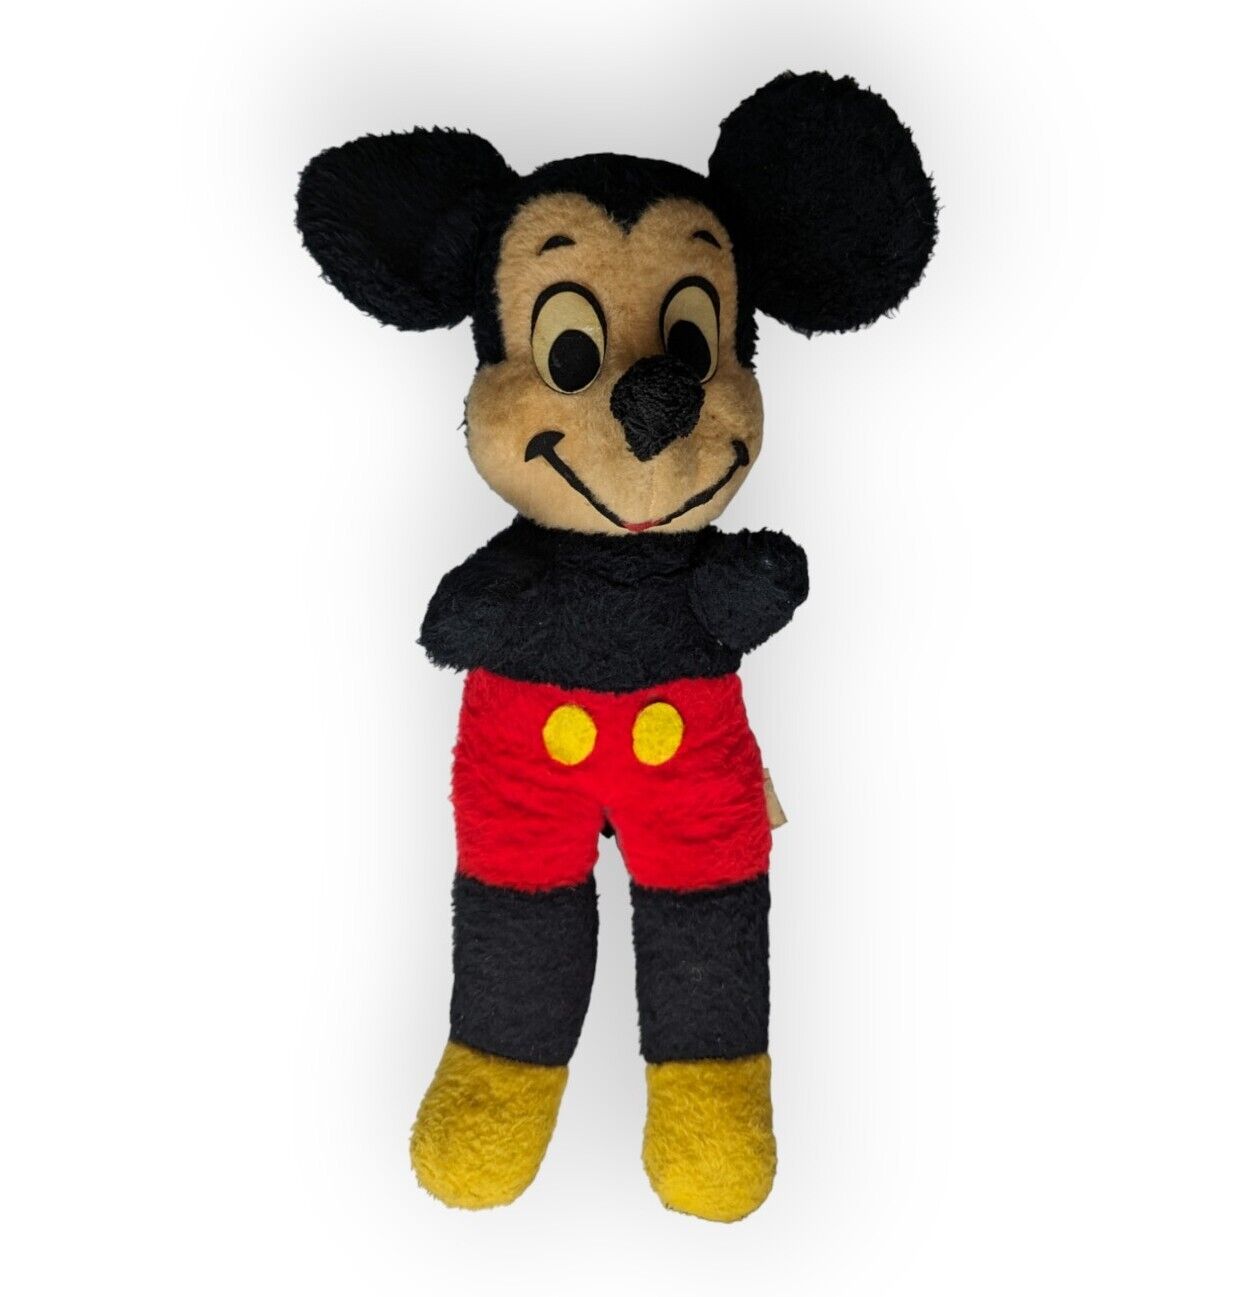 Vintage 1960s? Walt Disney Characters California Stuffed Toy Mickey Mouse Plush 